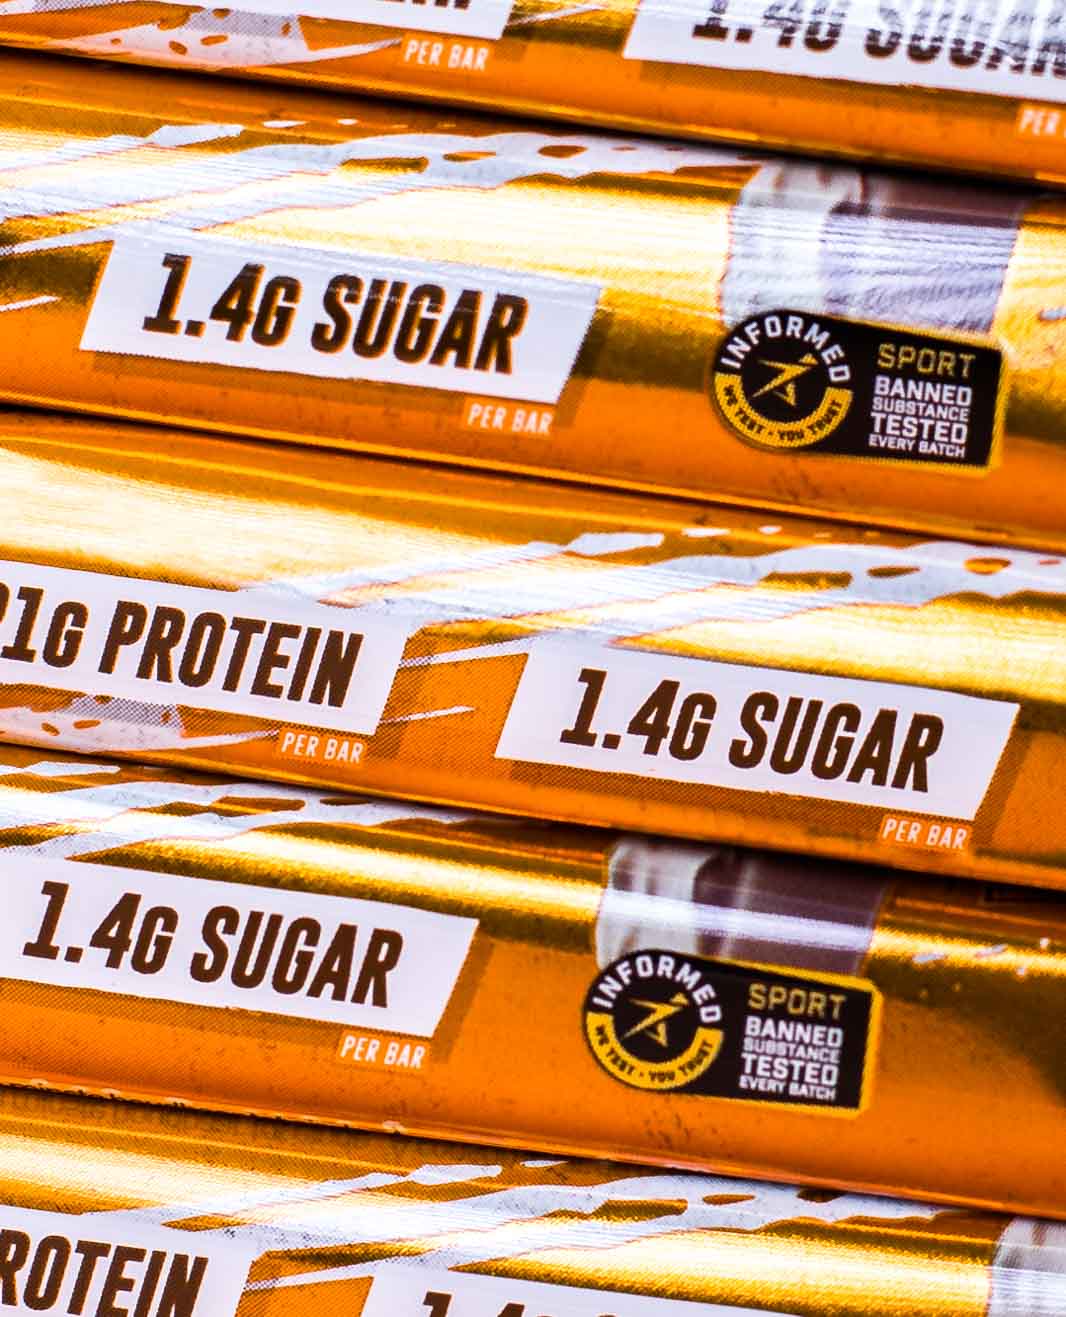 21g of Protein and 1.4g of sugar in a Jaffa Quake Protein Bar